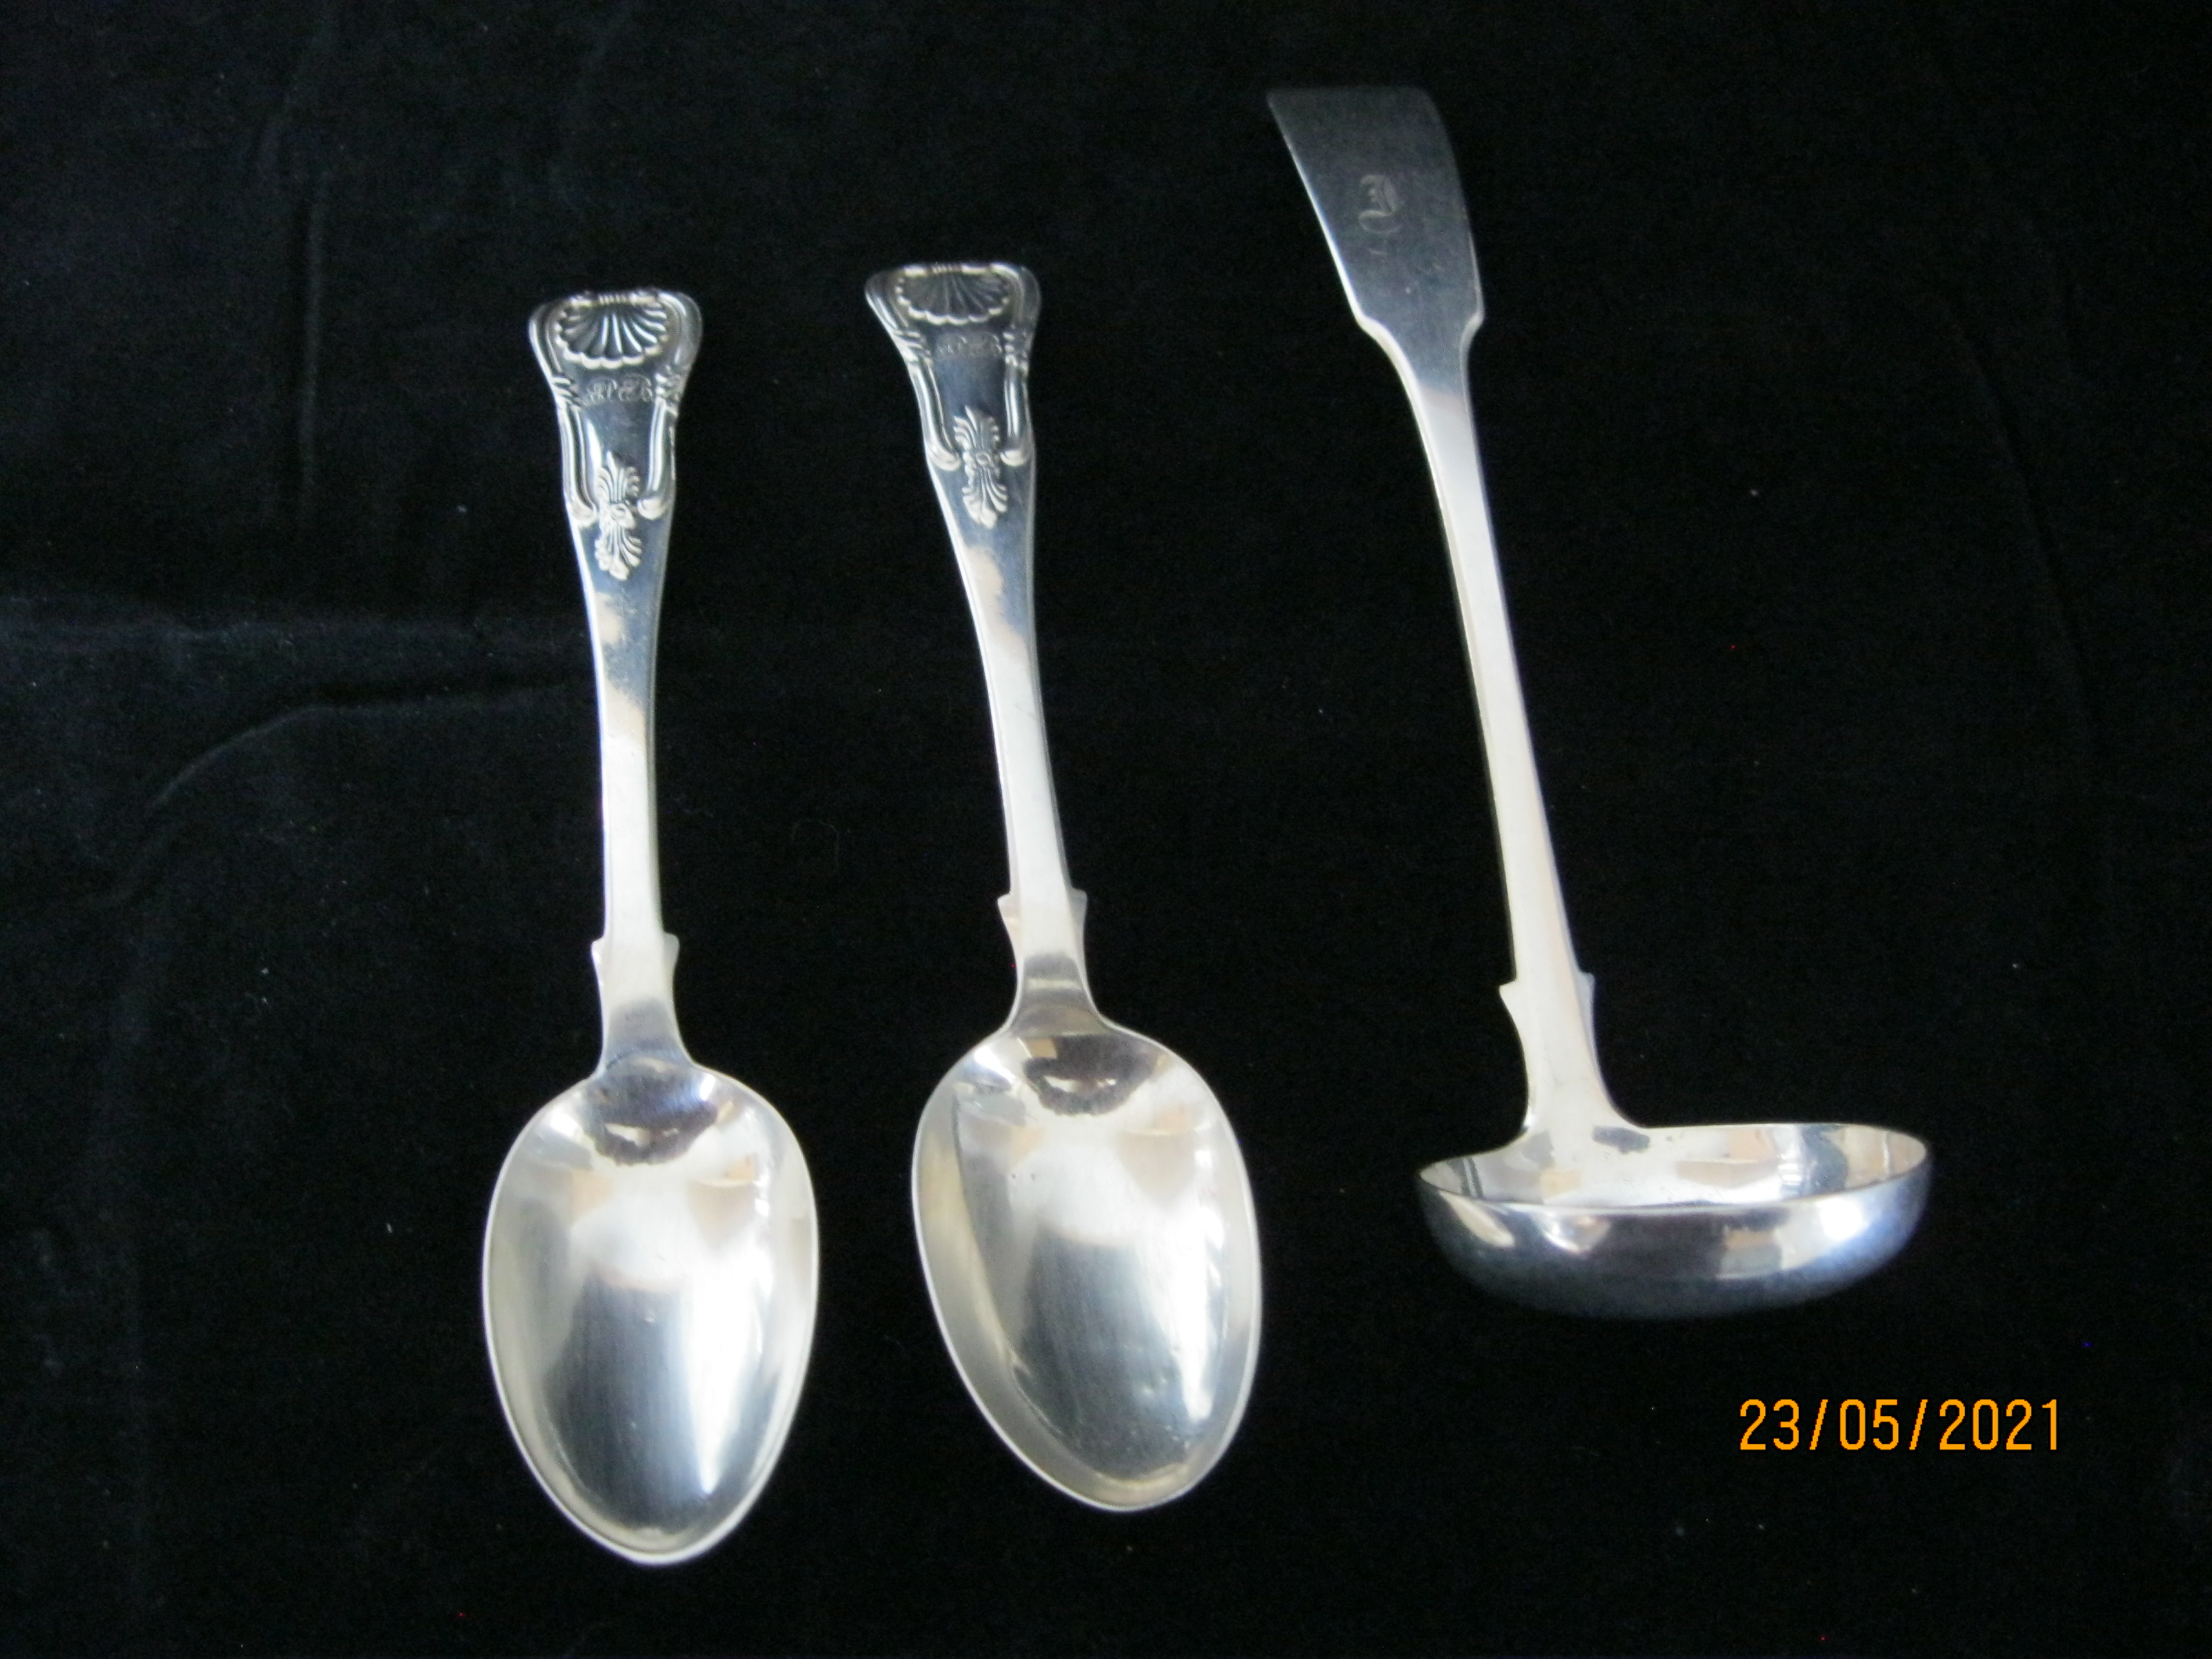 Pair Of Antique Scottish Silver Teaspoons & Scottish Silver Toddy Lade